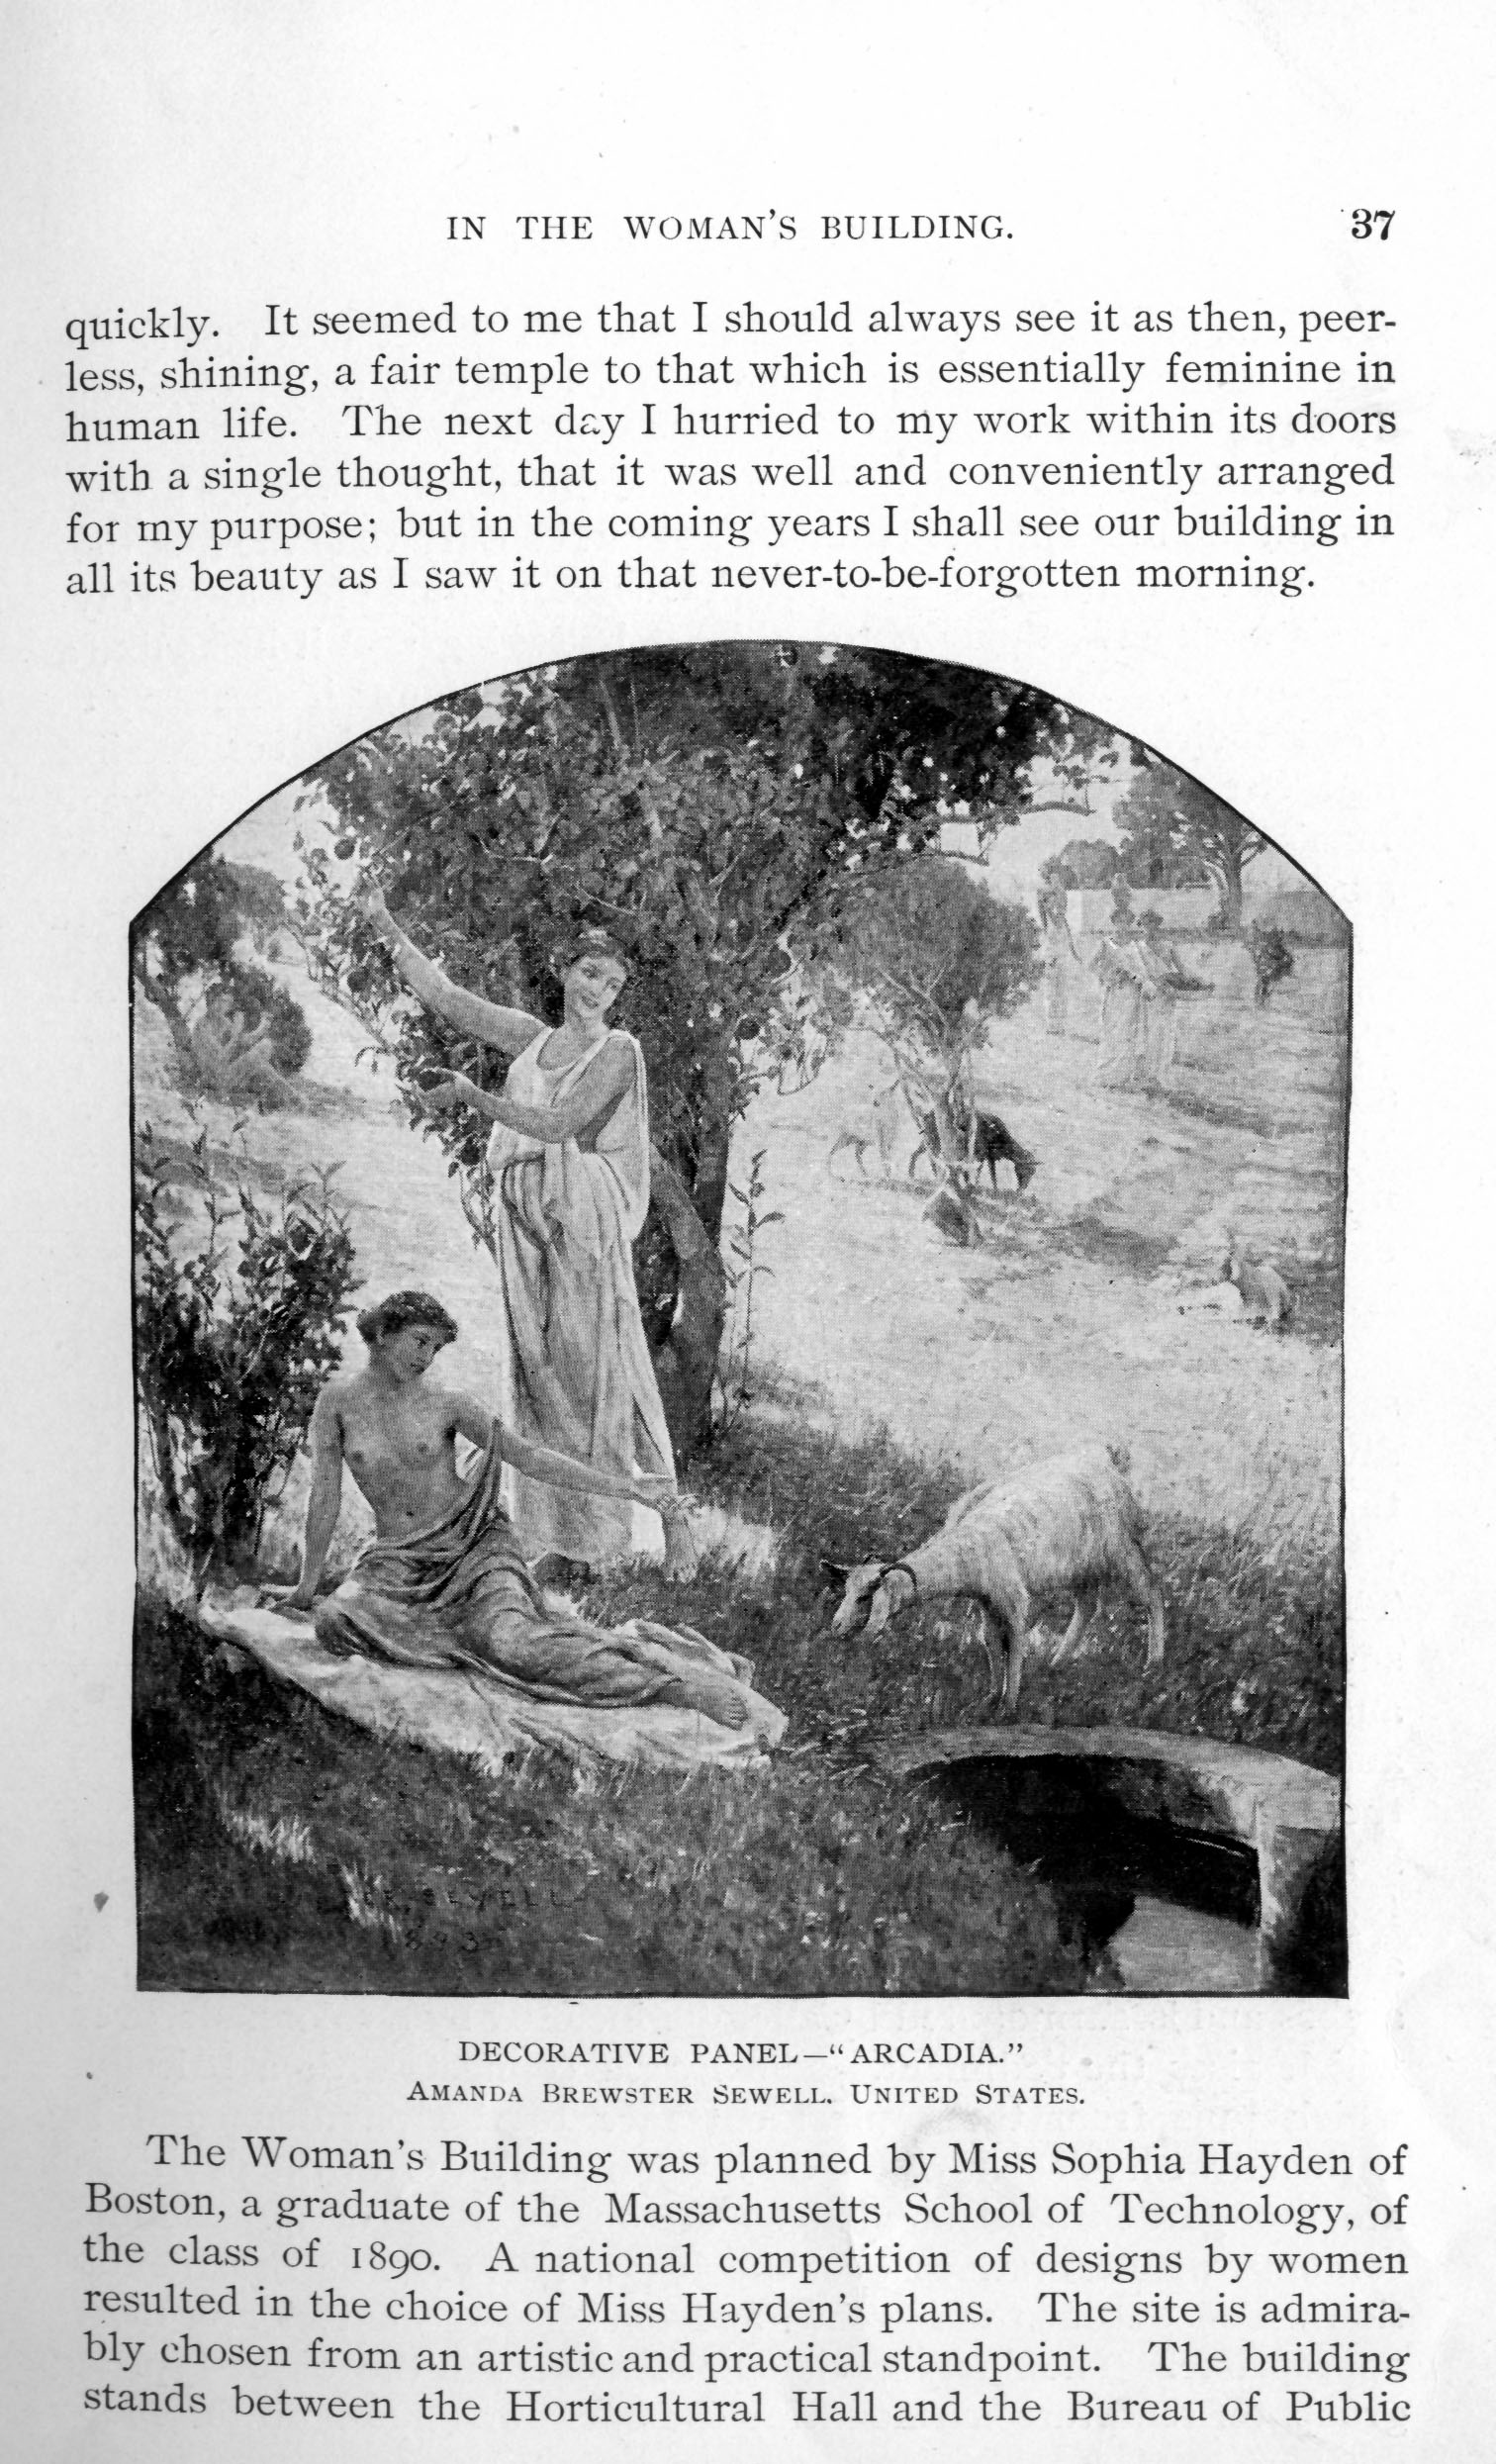 pastoral scene of two women in Grecian robes with goats